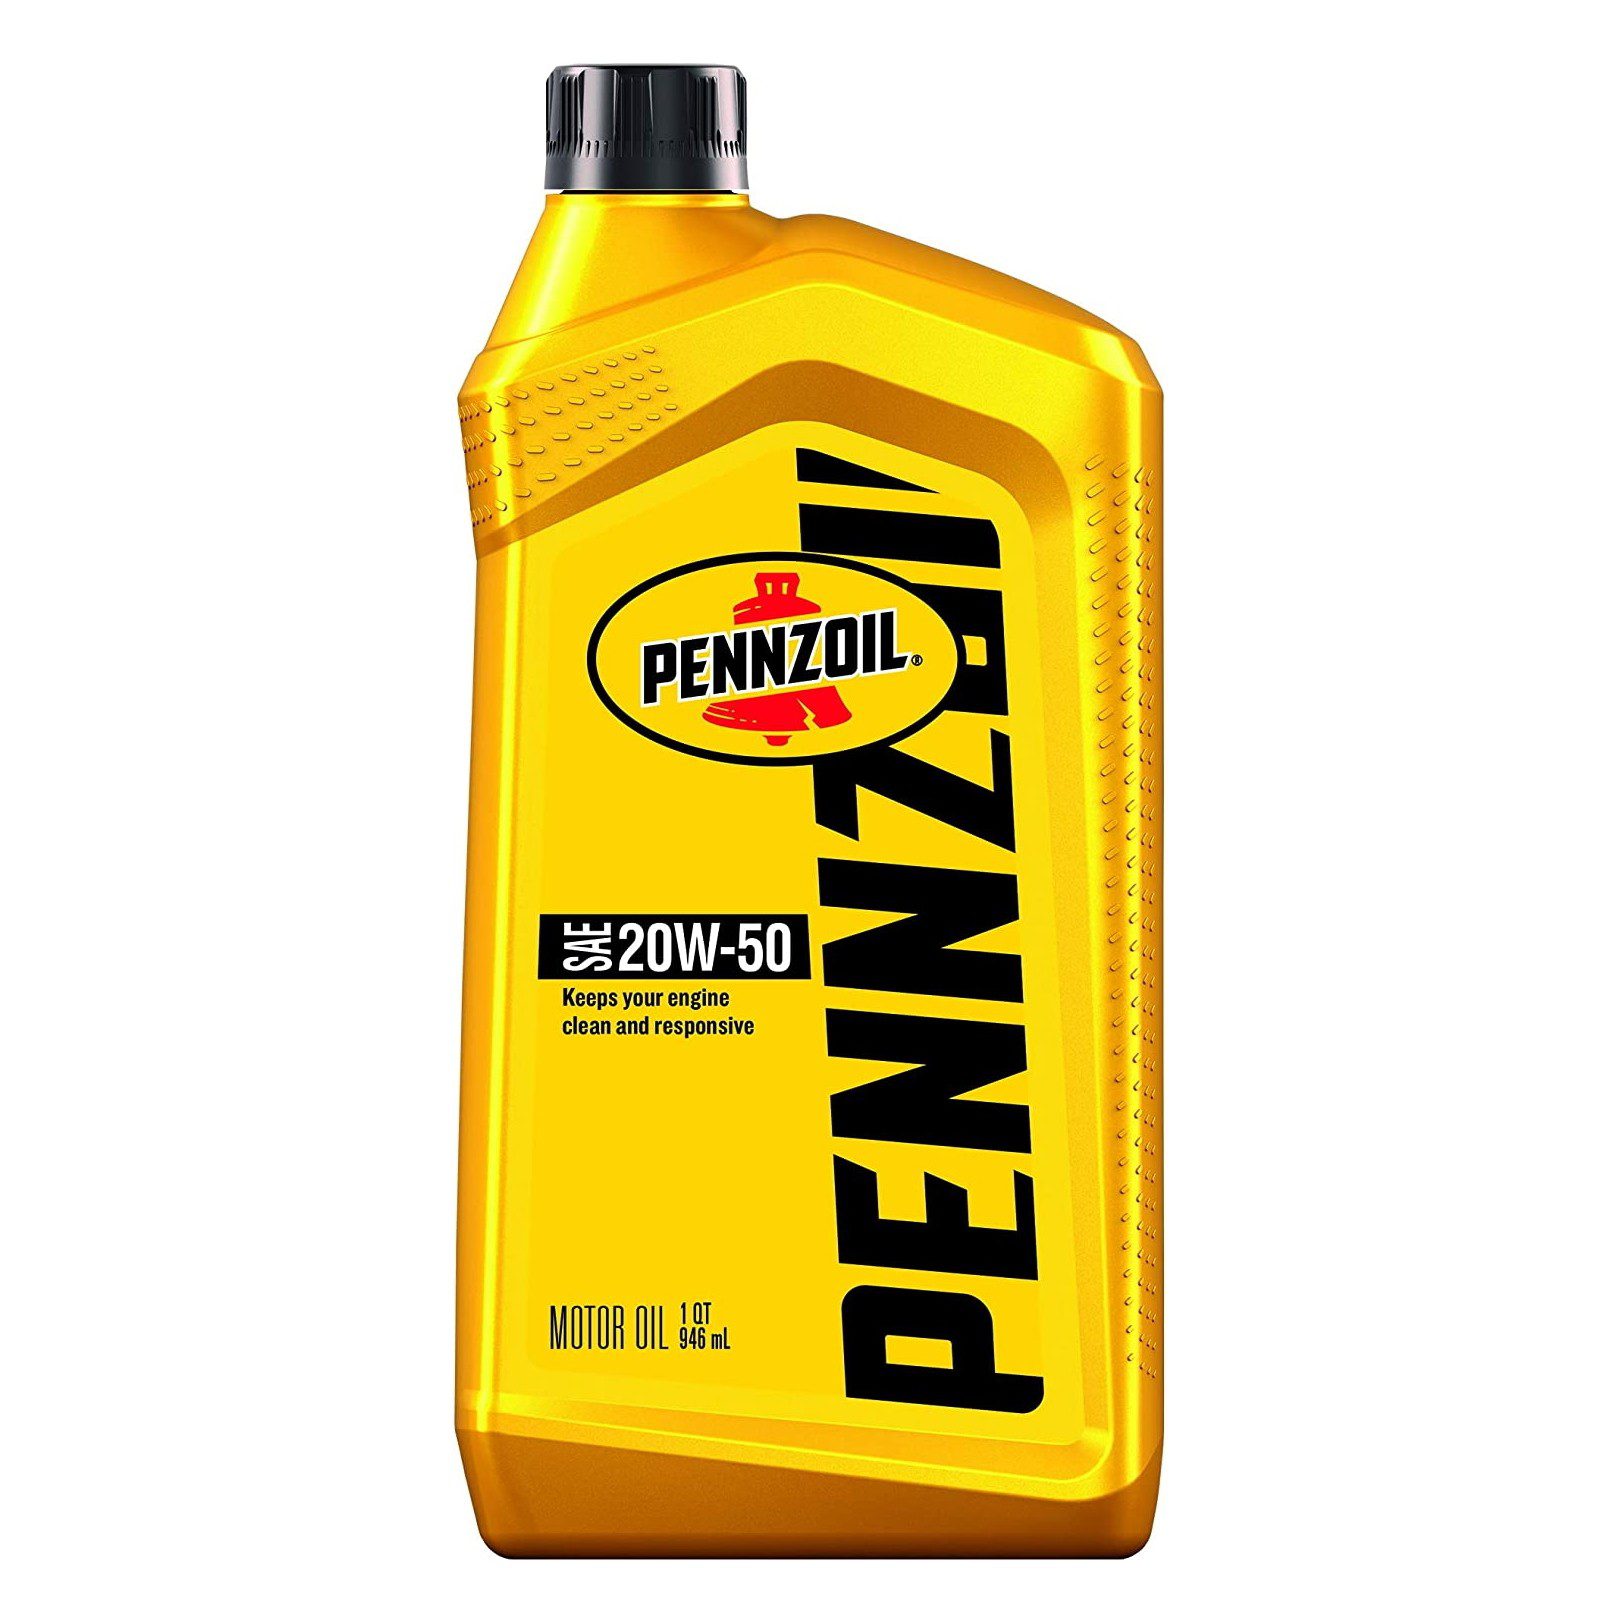 Is Pennzoil Oil Any Good